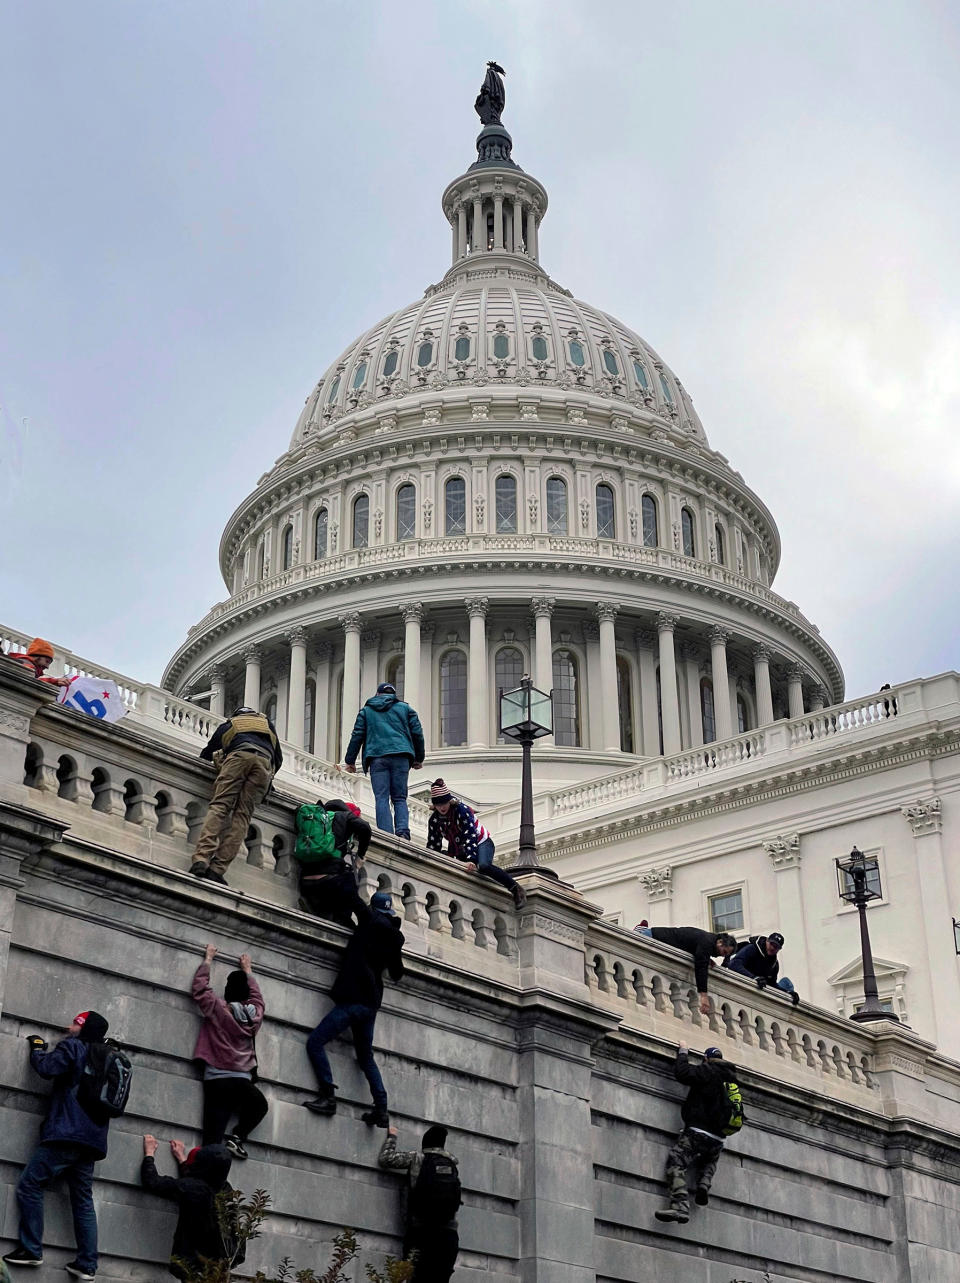 On Jan 6, The United States Capitol Building in Washington, D.C. was breached by thousands of protesters during a "Stop The Steal" rally in support of President Donald Trump during the worldwide coronavirus pandemic.<span class="copyright">zz/STRF/STAR MAX/IPx—AP</span>